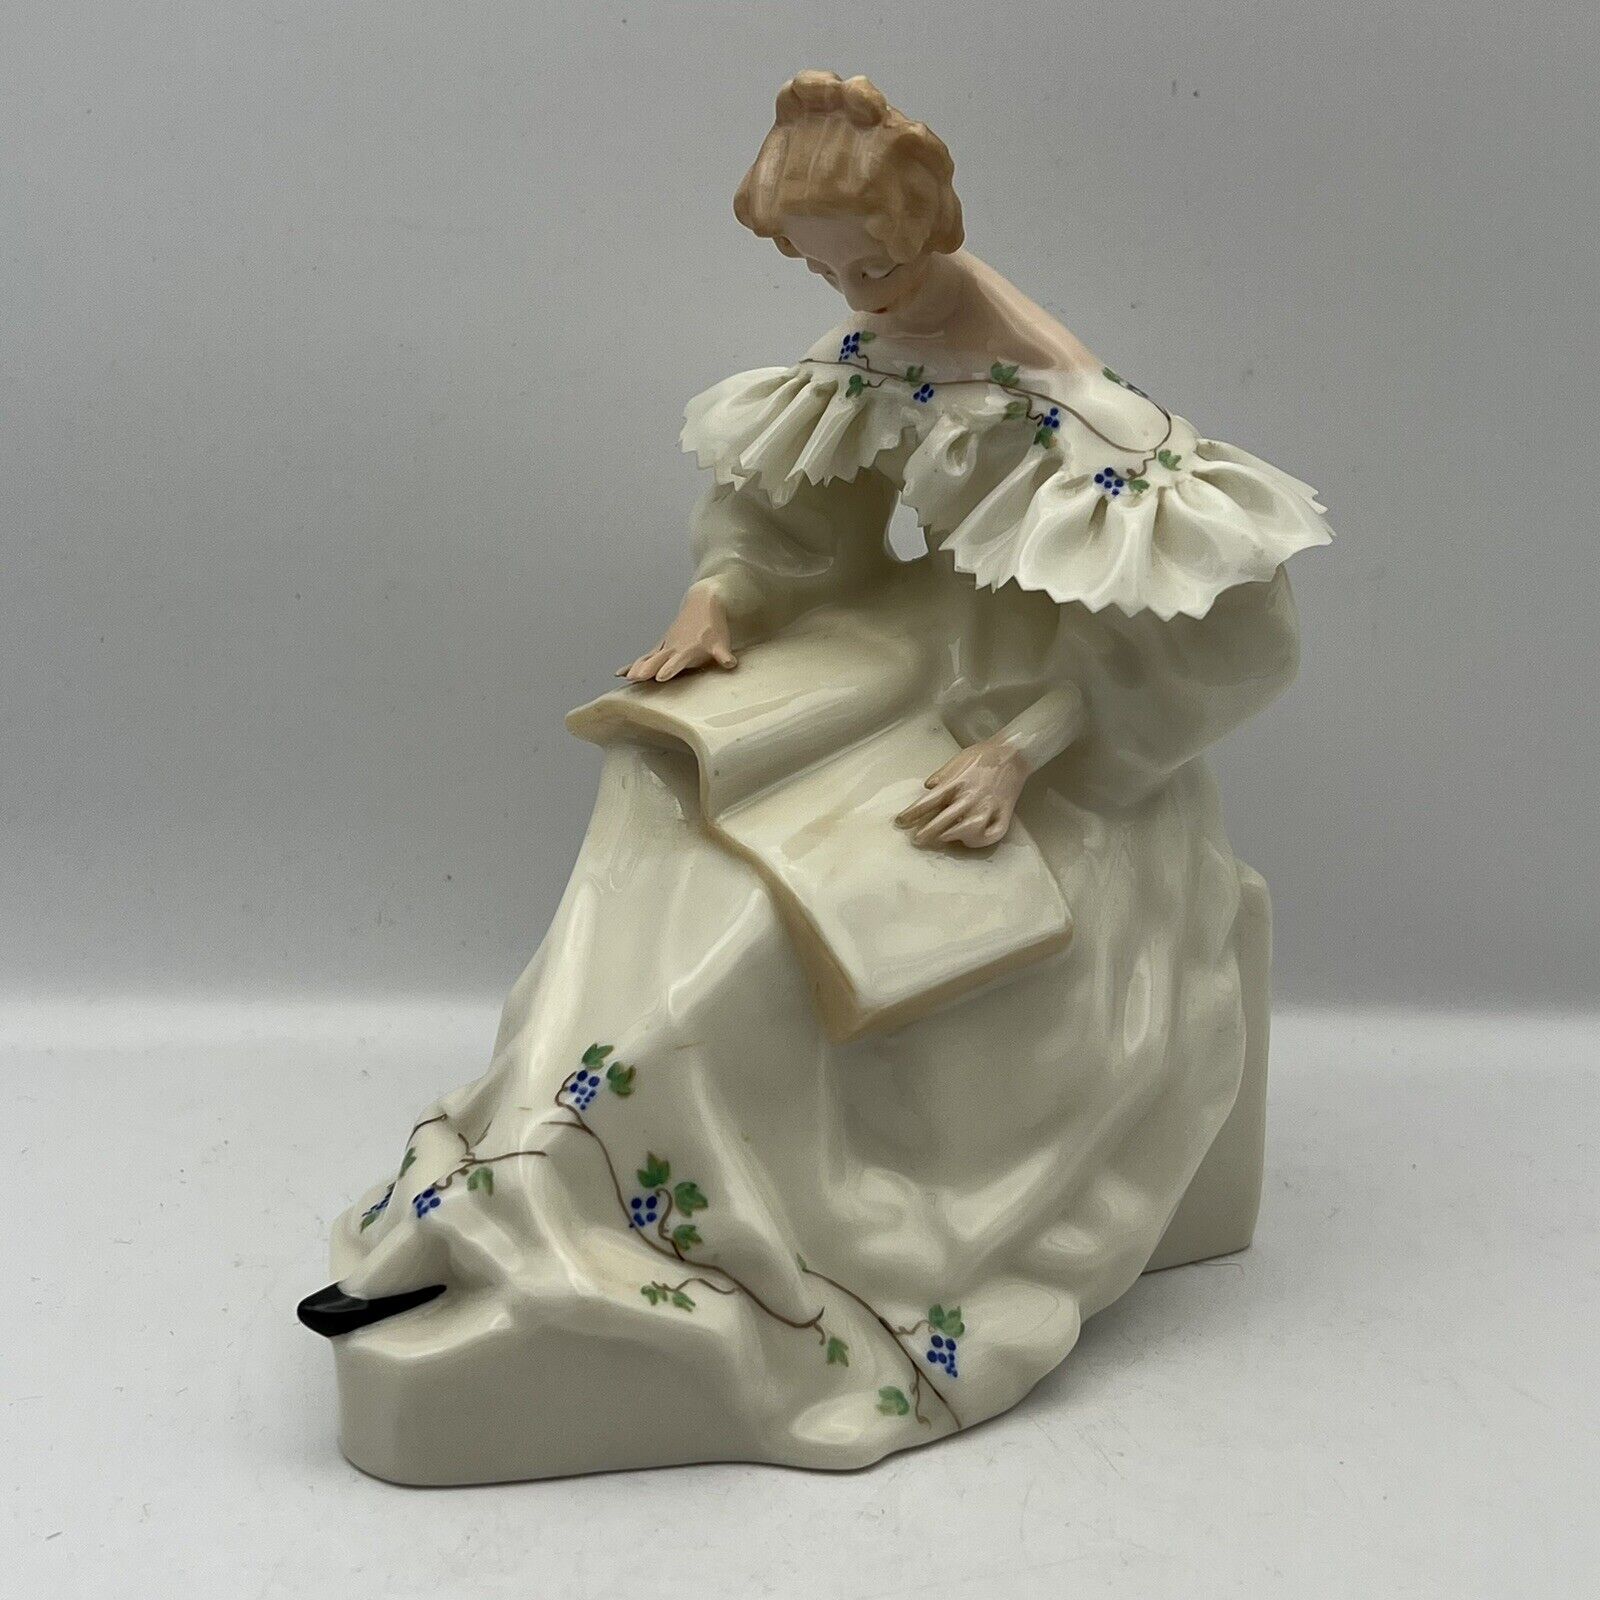 EXTREMELY RARE Early Lenox Figurine- “The Reader” - Est. late 1800s Porcelain